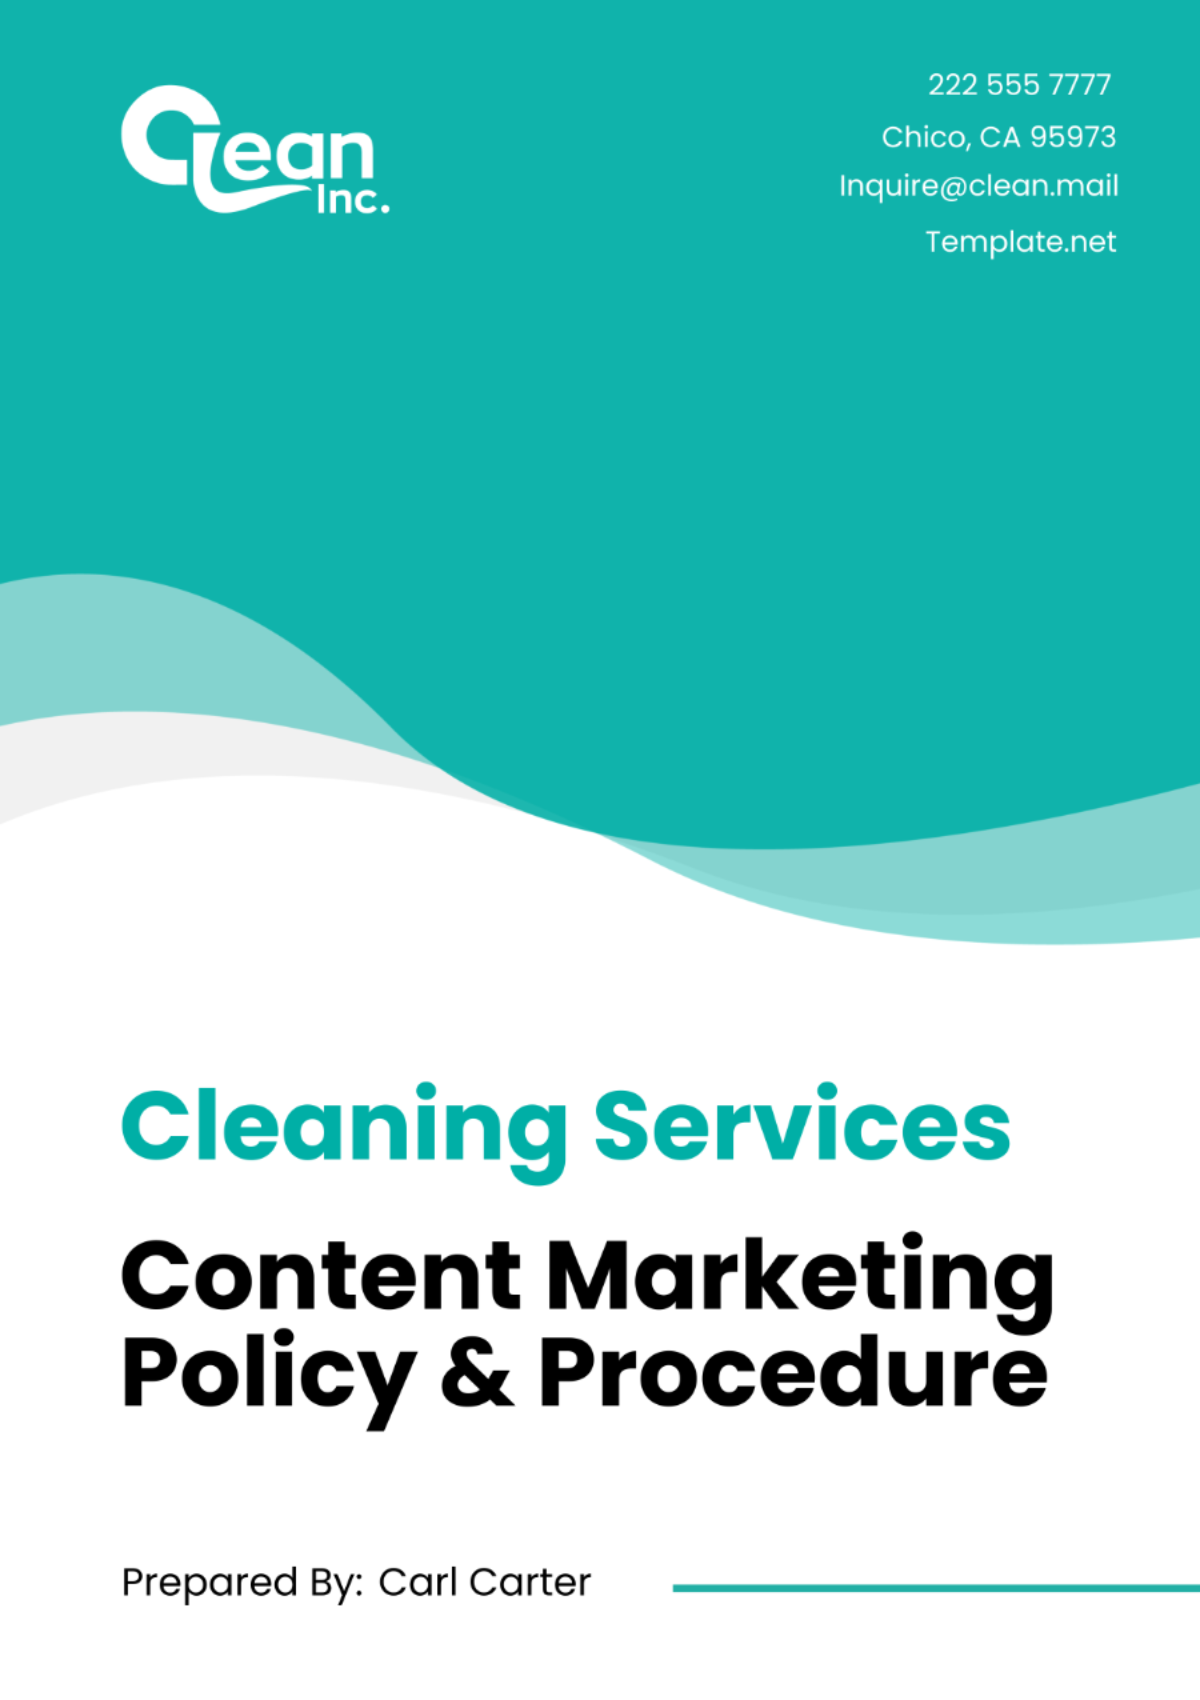 Cleaning Services Content Marketing Policy & Procedure Template